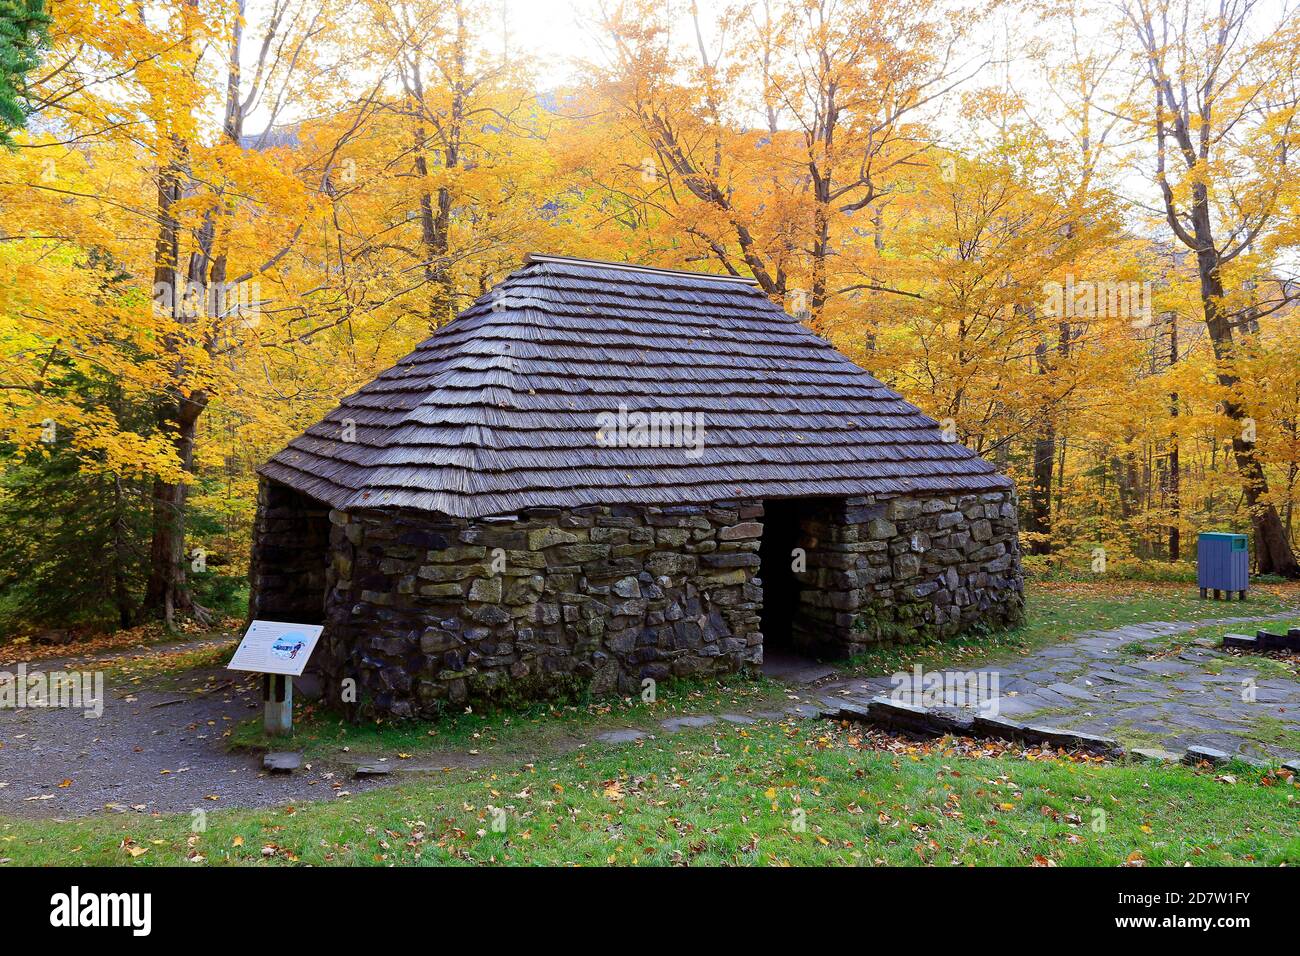 The Lone Shieling is a Scottish-style sheep crofters hut (also known as a bothran or shieling) located in Cape Breton Highlands National Park, Nova Sc Stock Photo